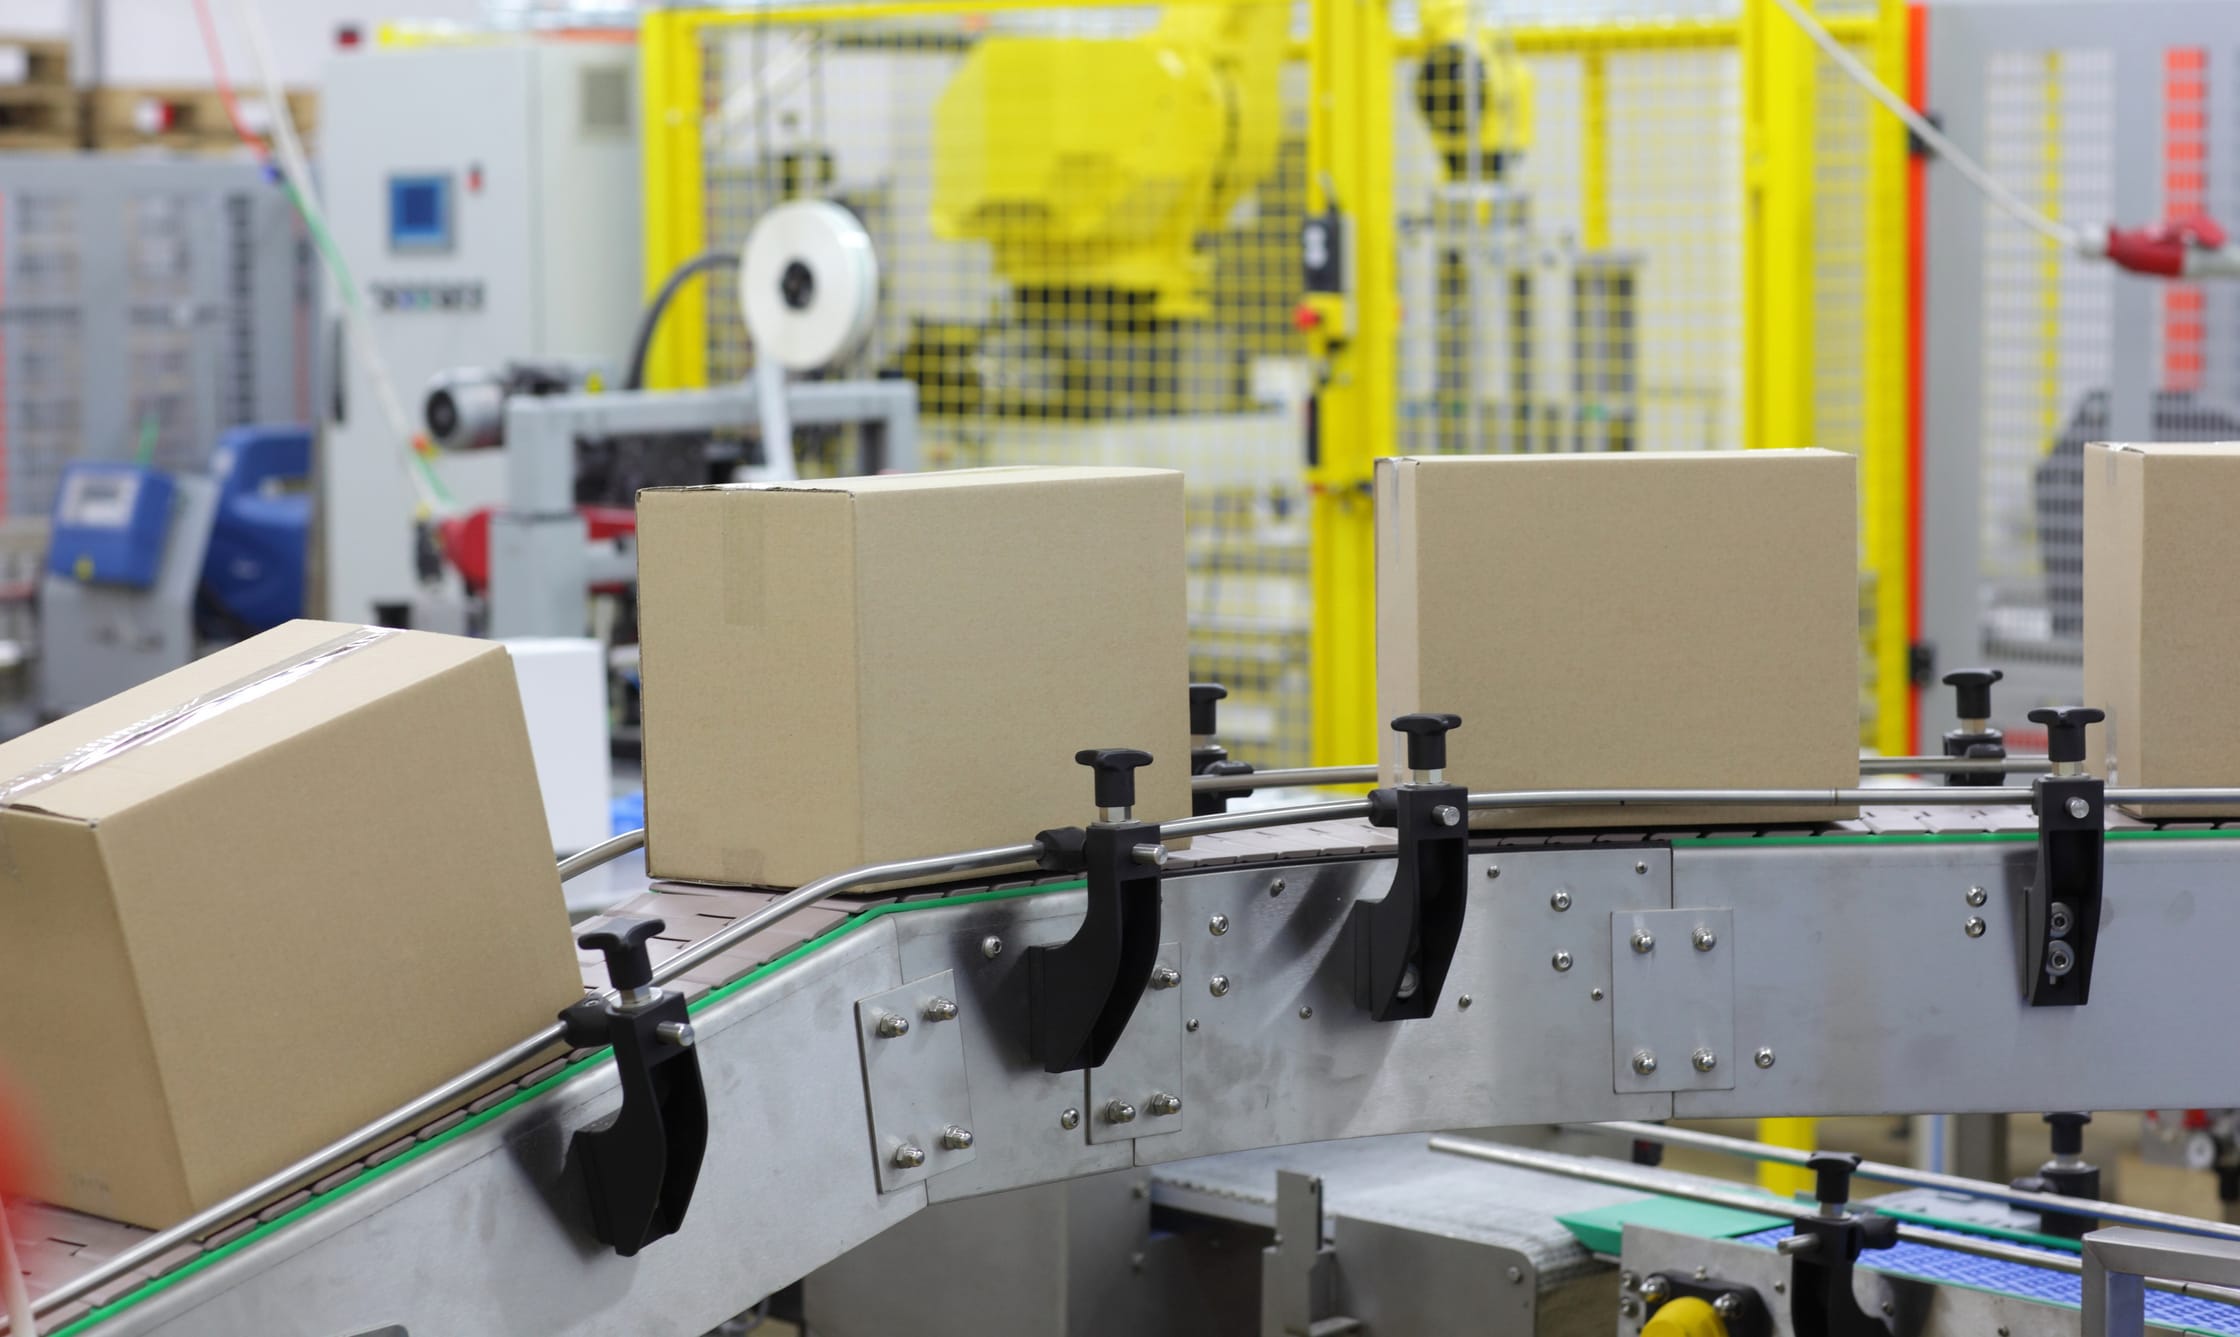 automation - Cardboard boxes on conveyor belt in factory